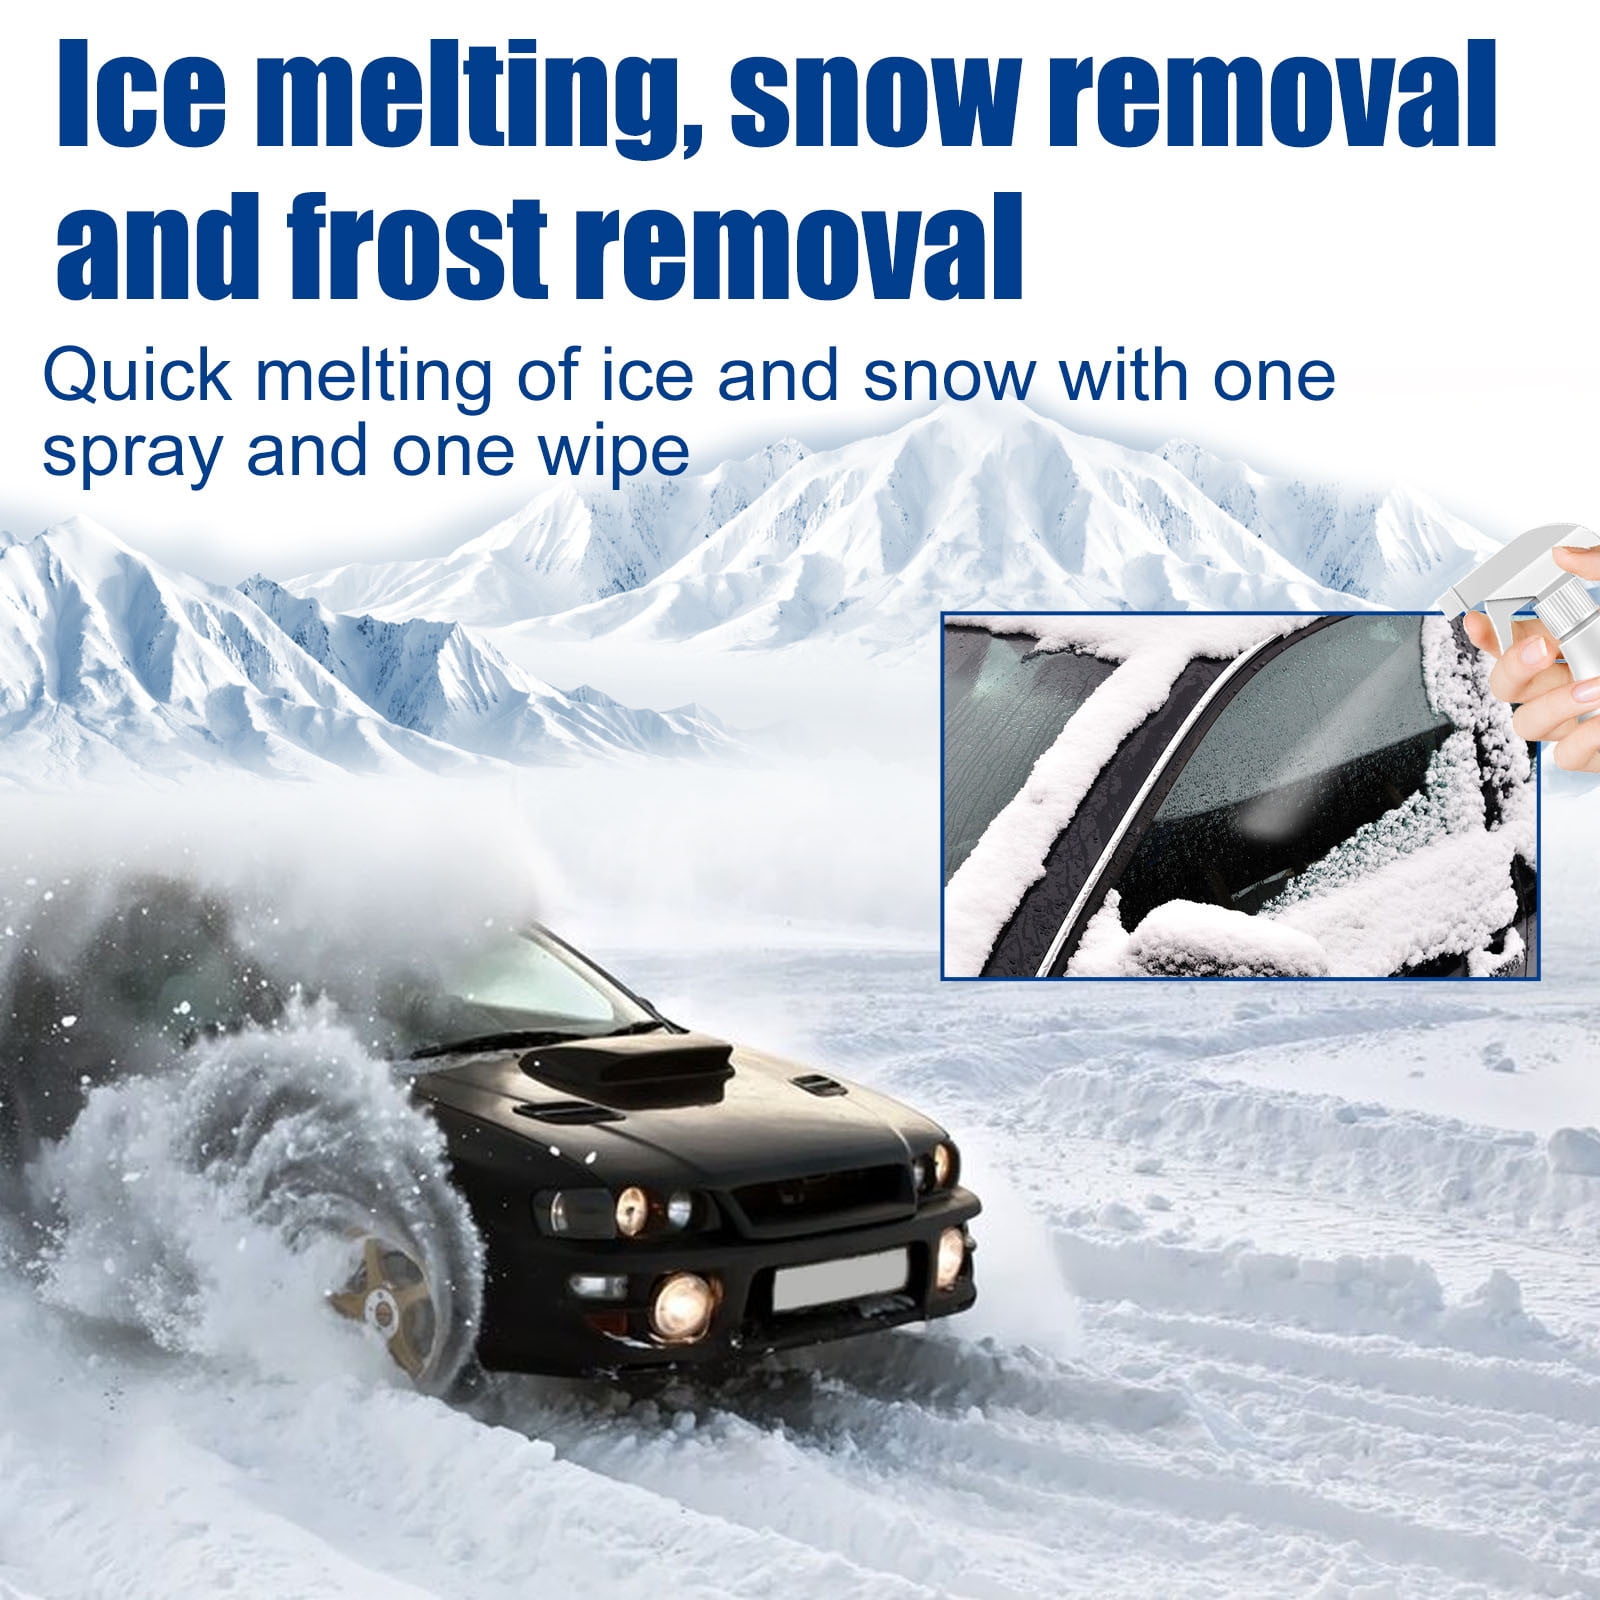 Defrost Spray Windshield De-Icer For Car Windshield 2 Oz Minimal Scraping  Improve Visibility Ice Remover Melting Spray For